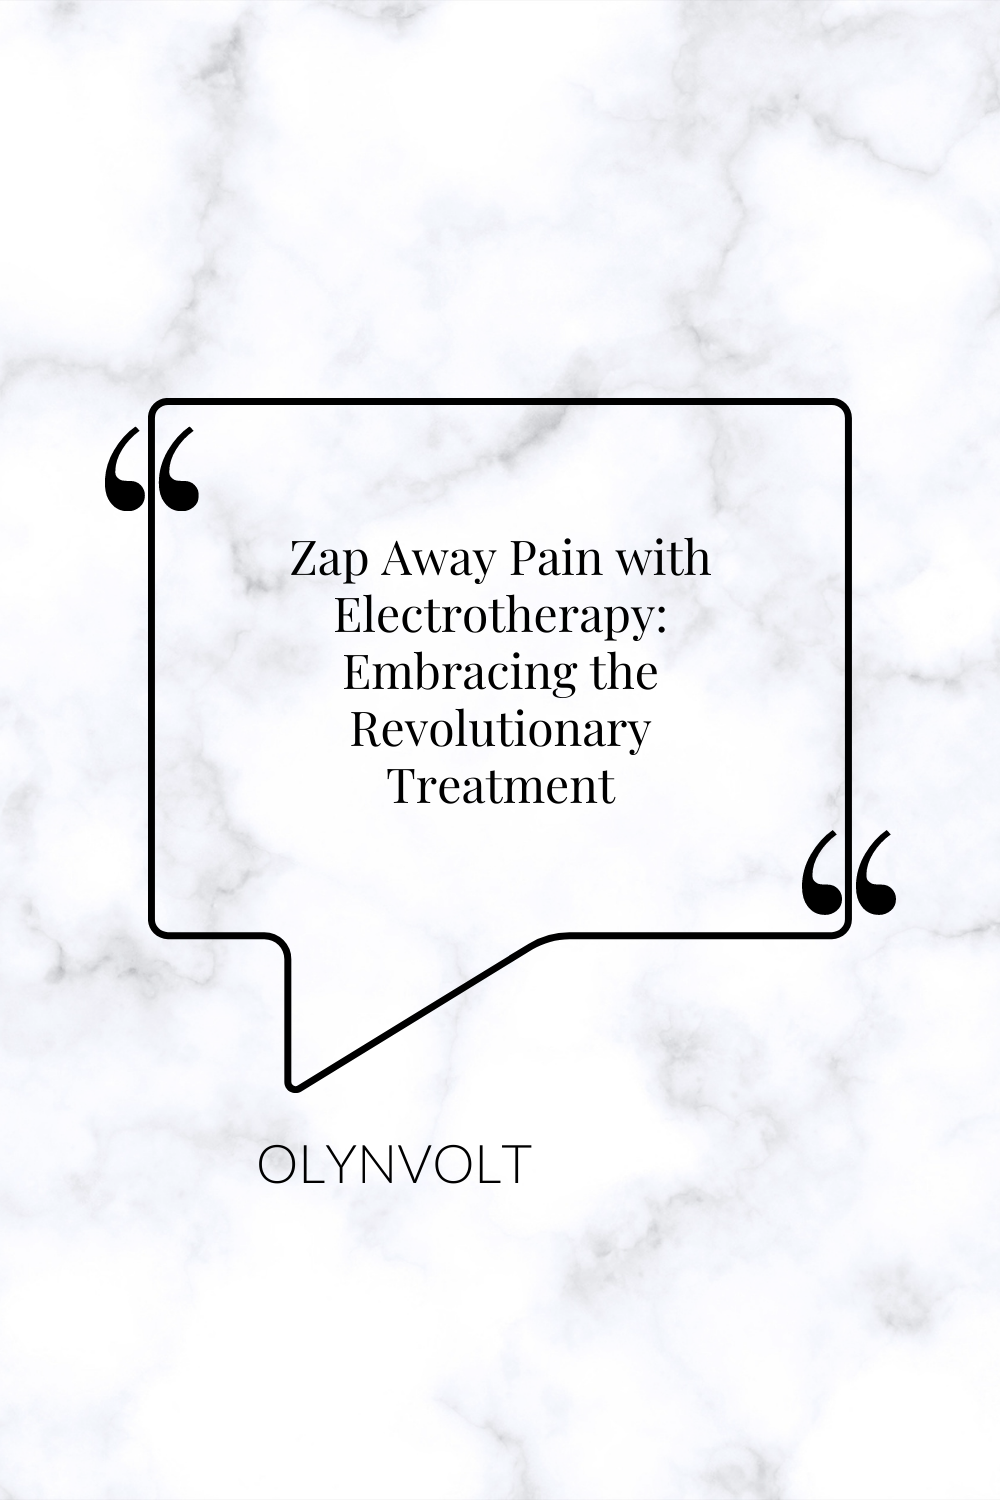 Zap Away Pain with Electrotherapy